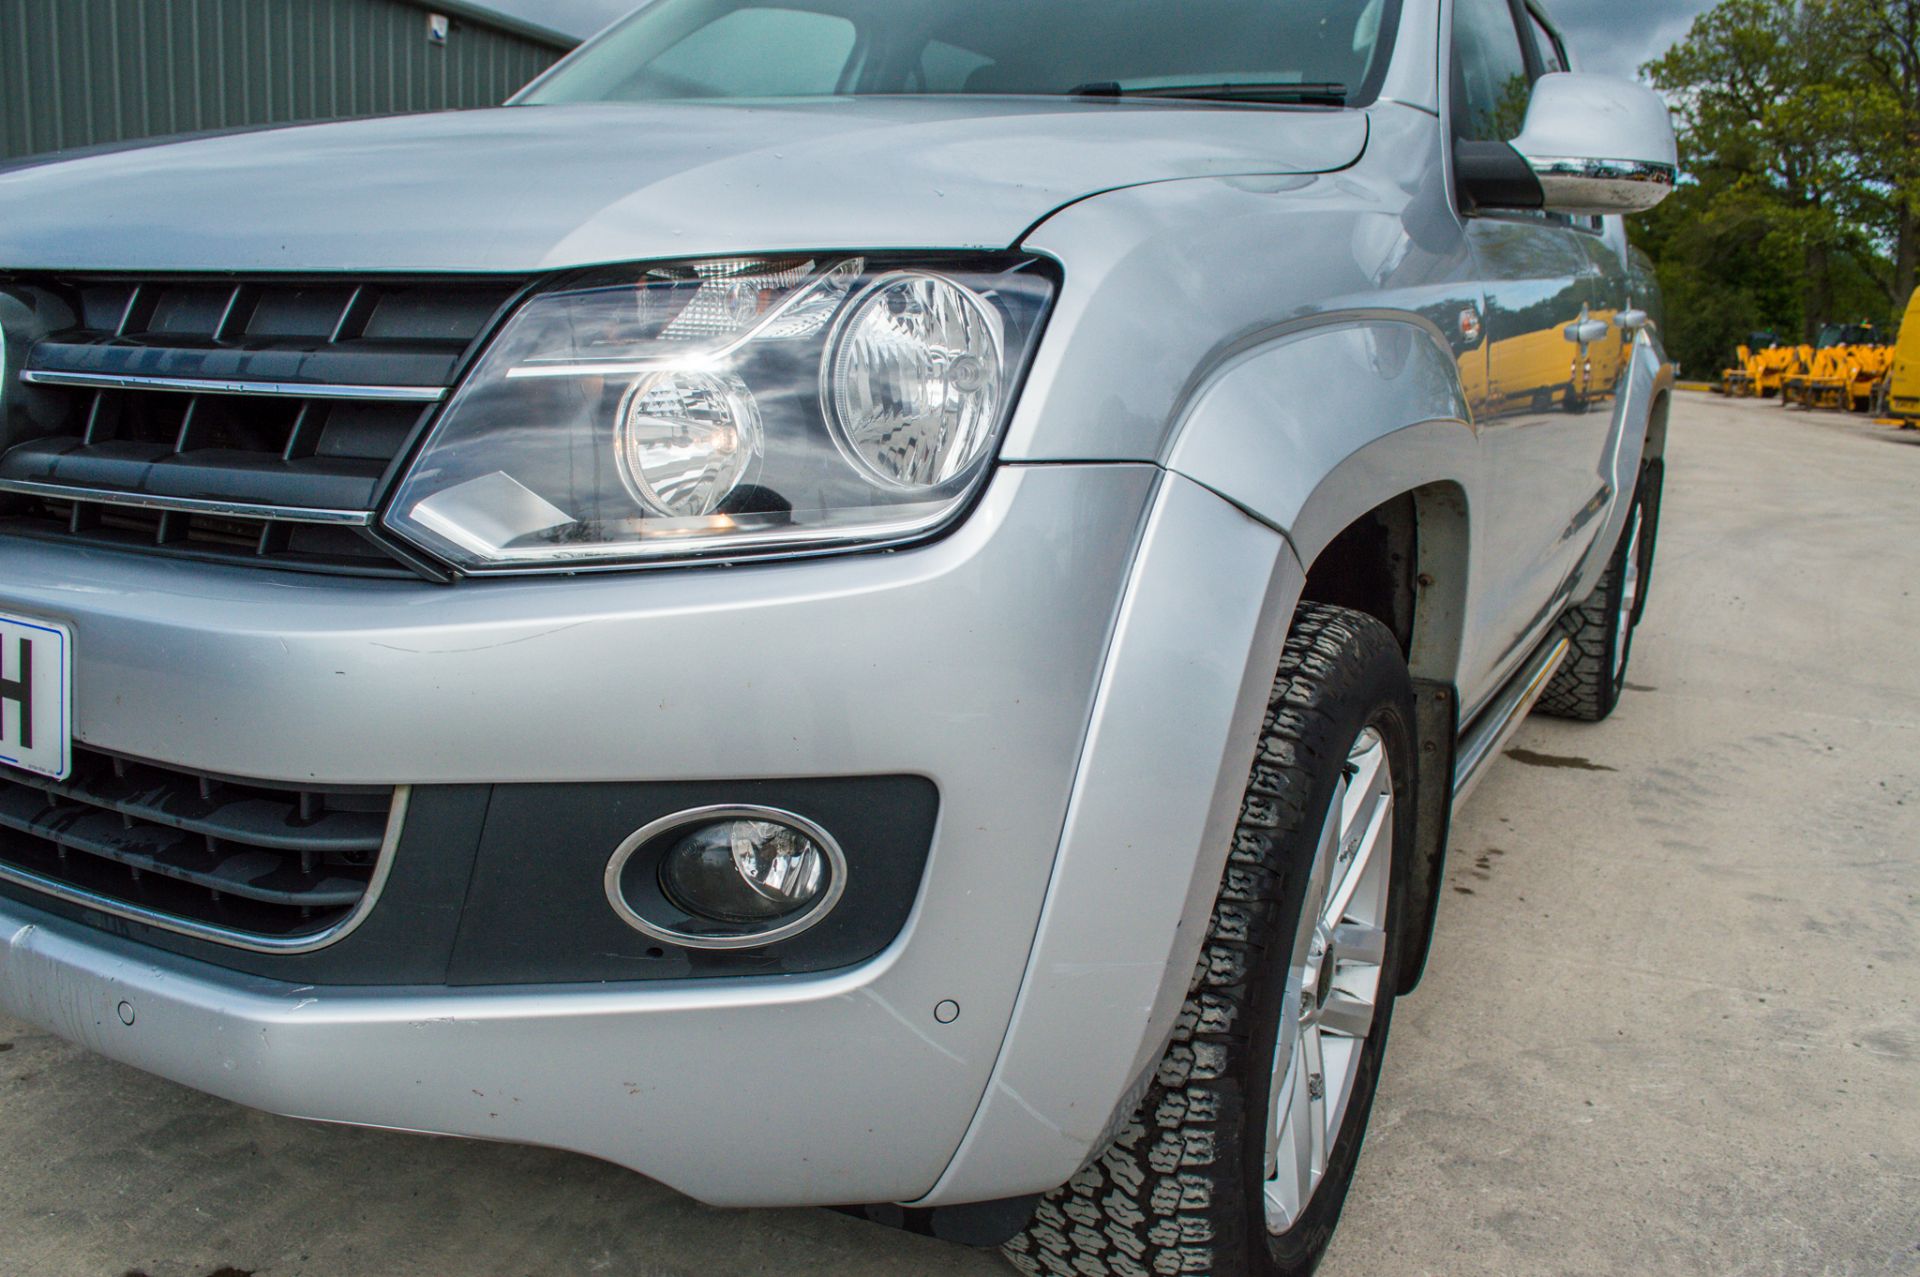 Volkswagen Amarok 2.0 TDI highline 4wd automatic double cab pick up Reg No: PE63 EYH Date of - Image 11 of 30